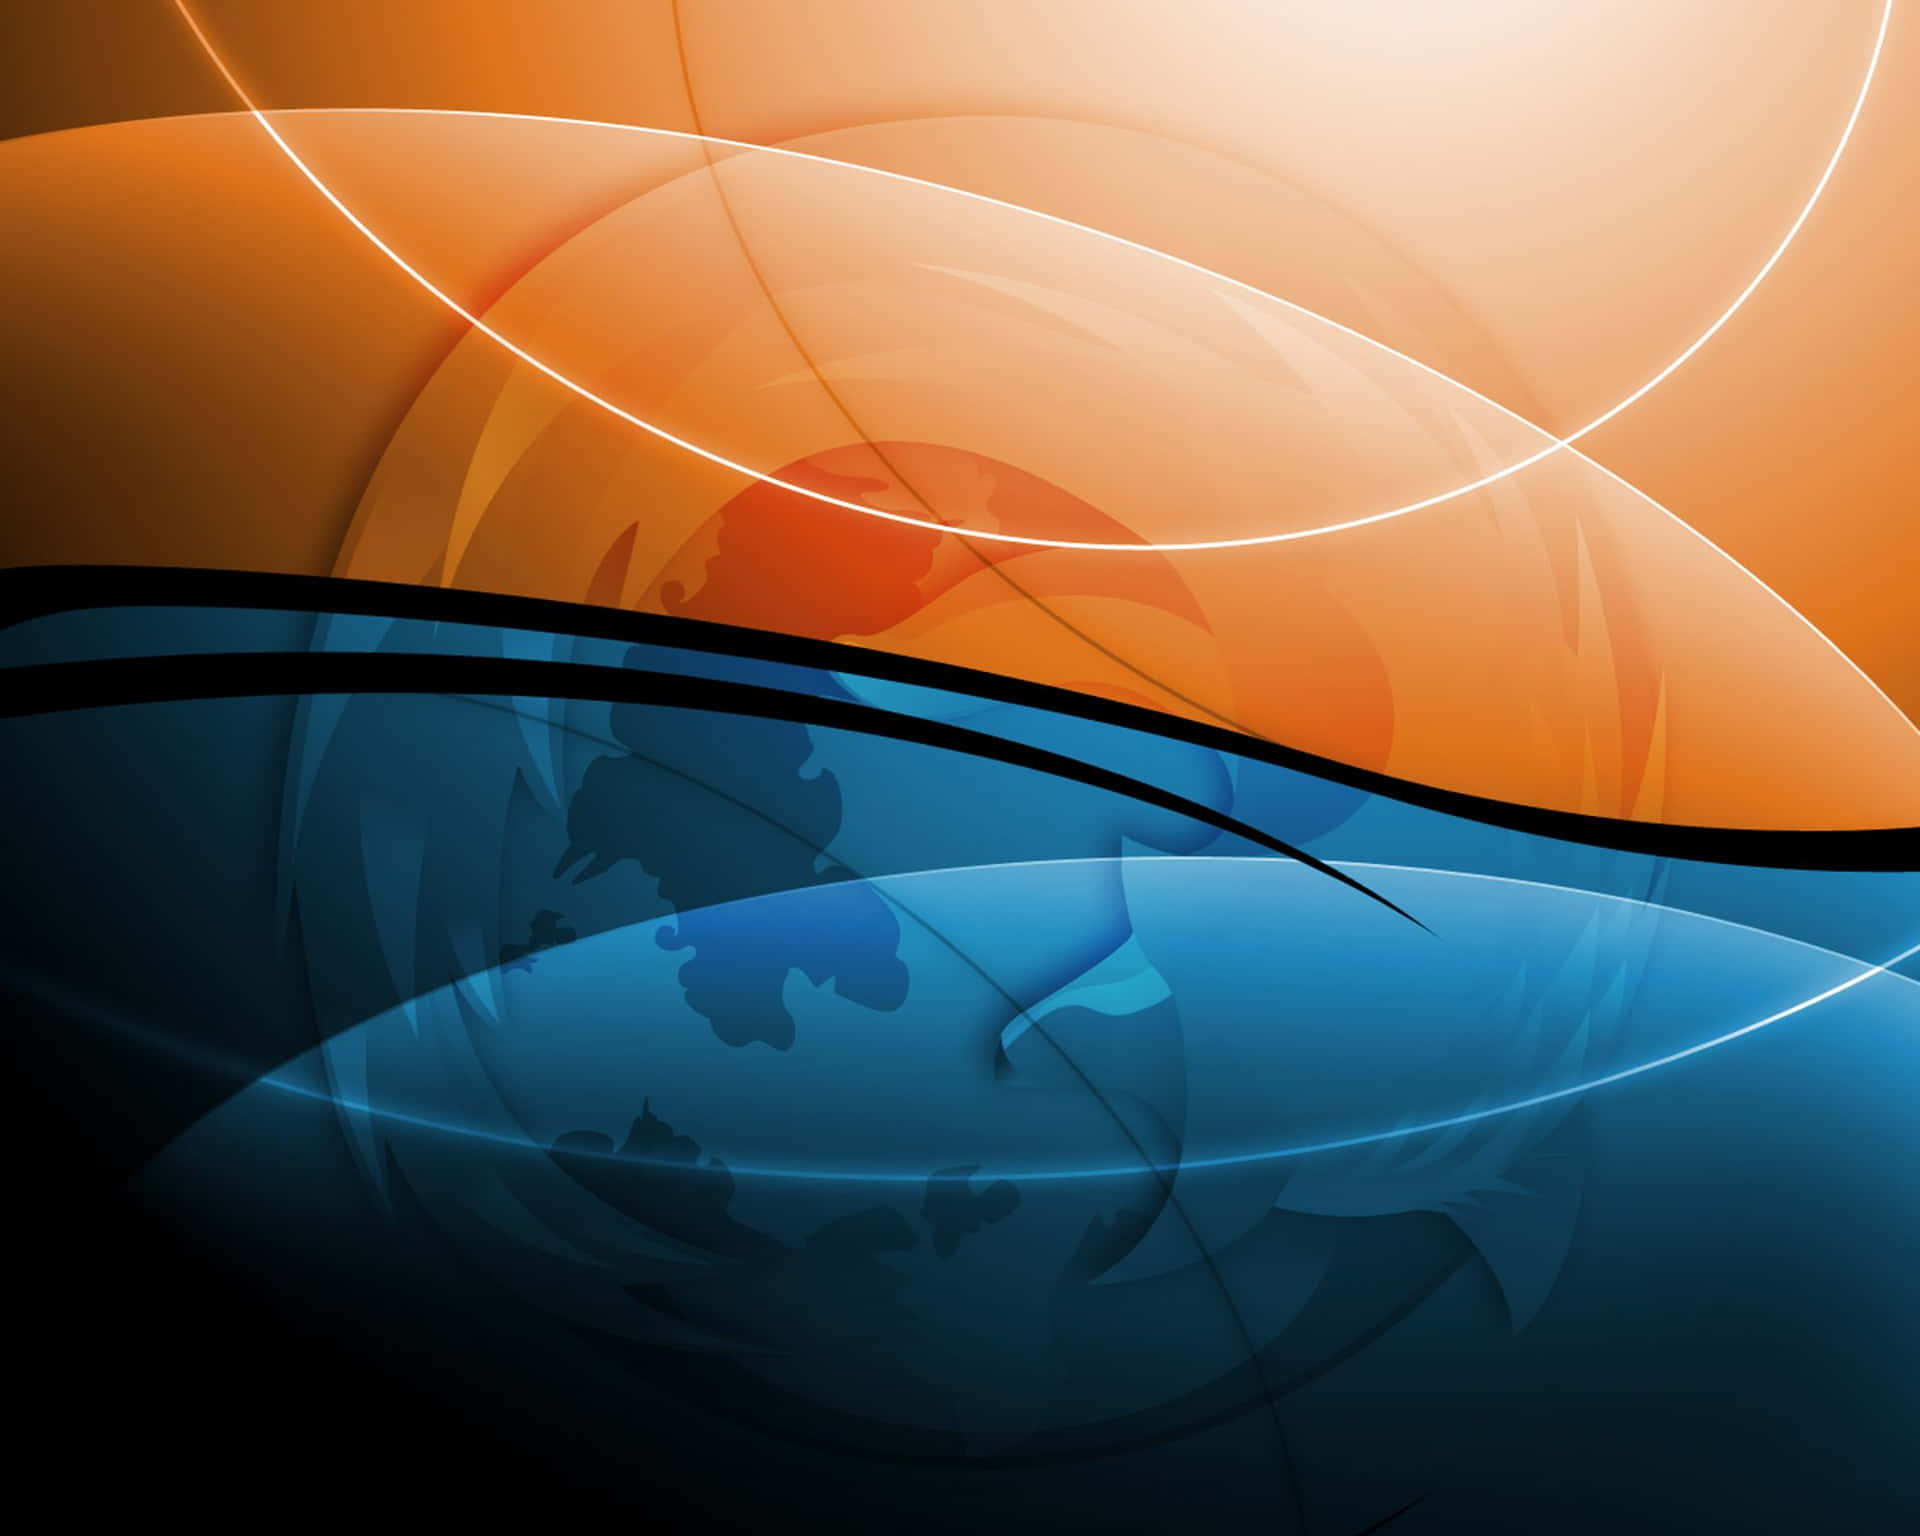 An Abstract Image Of A Blue And Orange Background